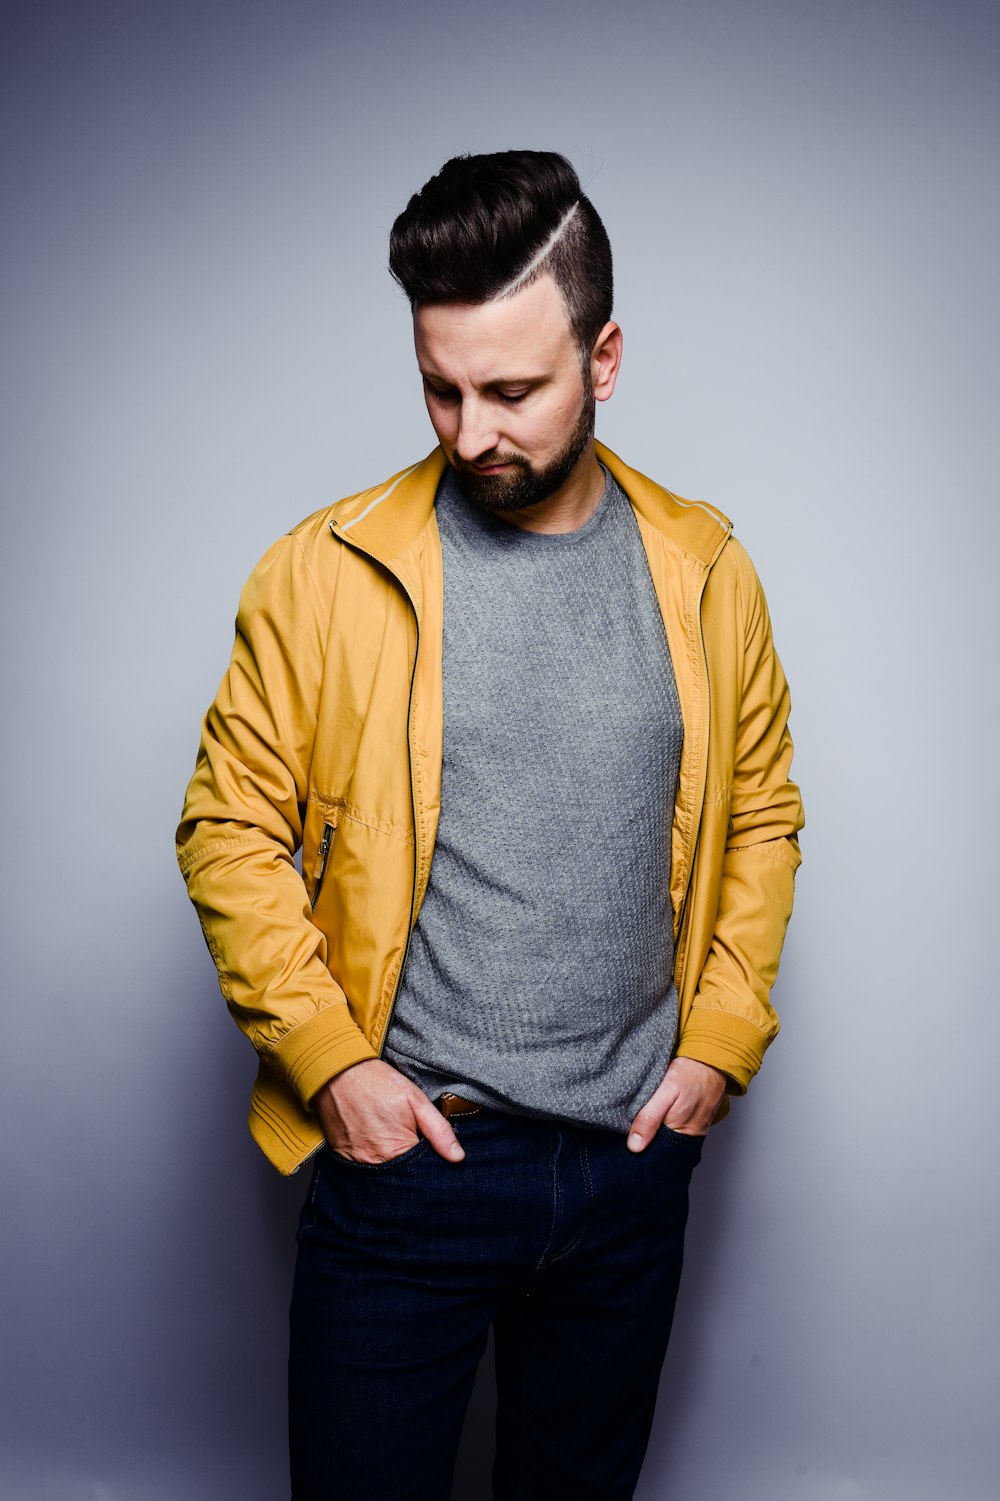 a man in a yellow jacket is posing for a picture